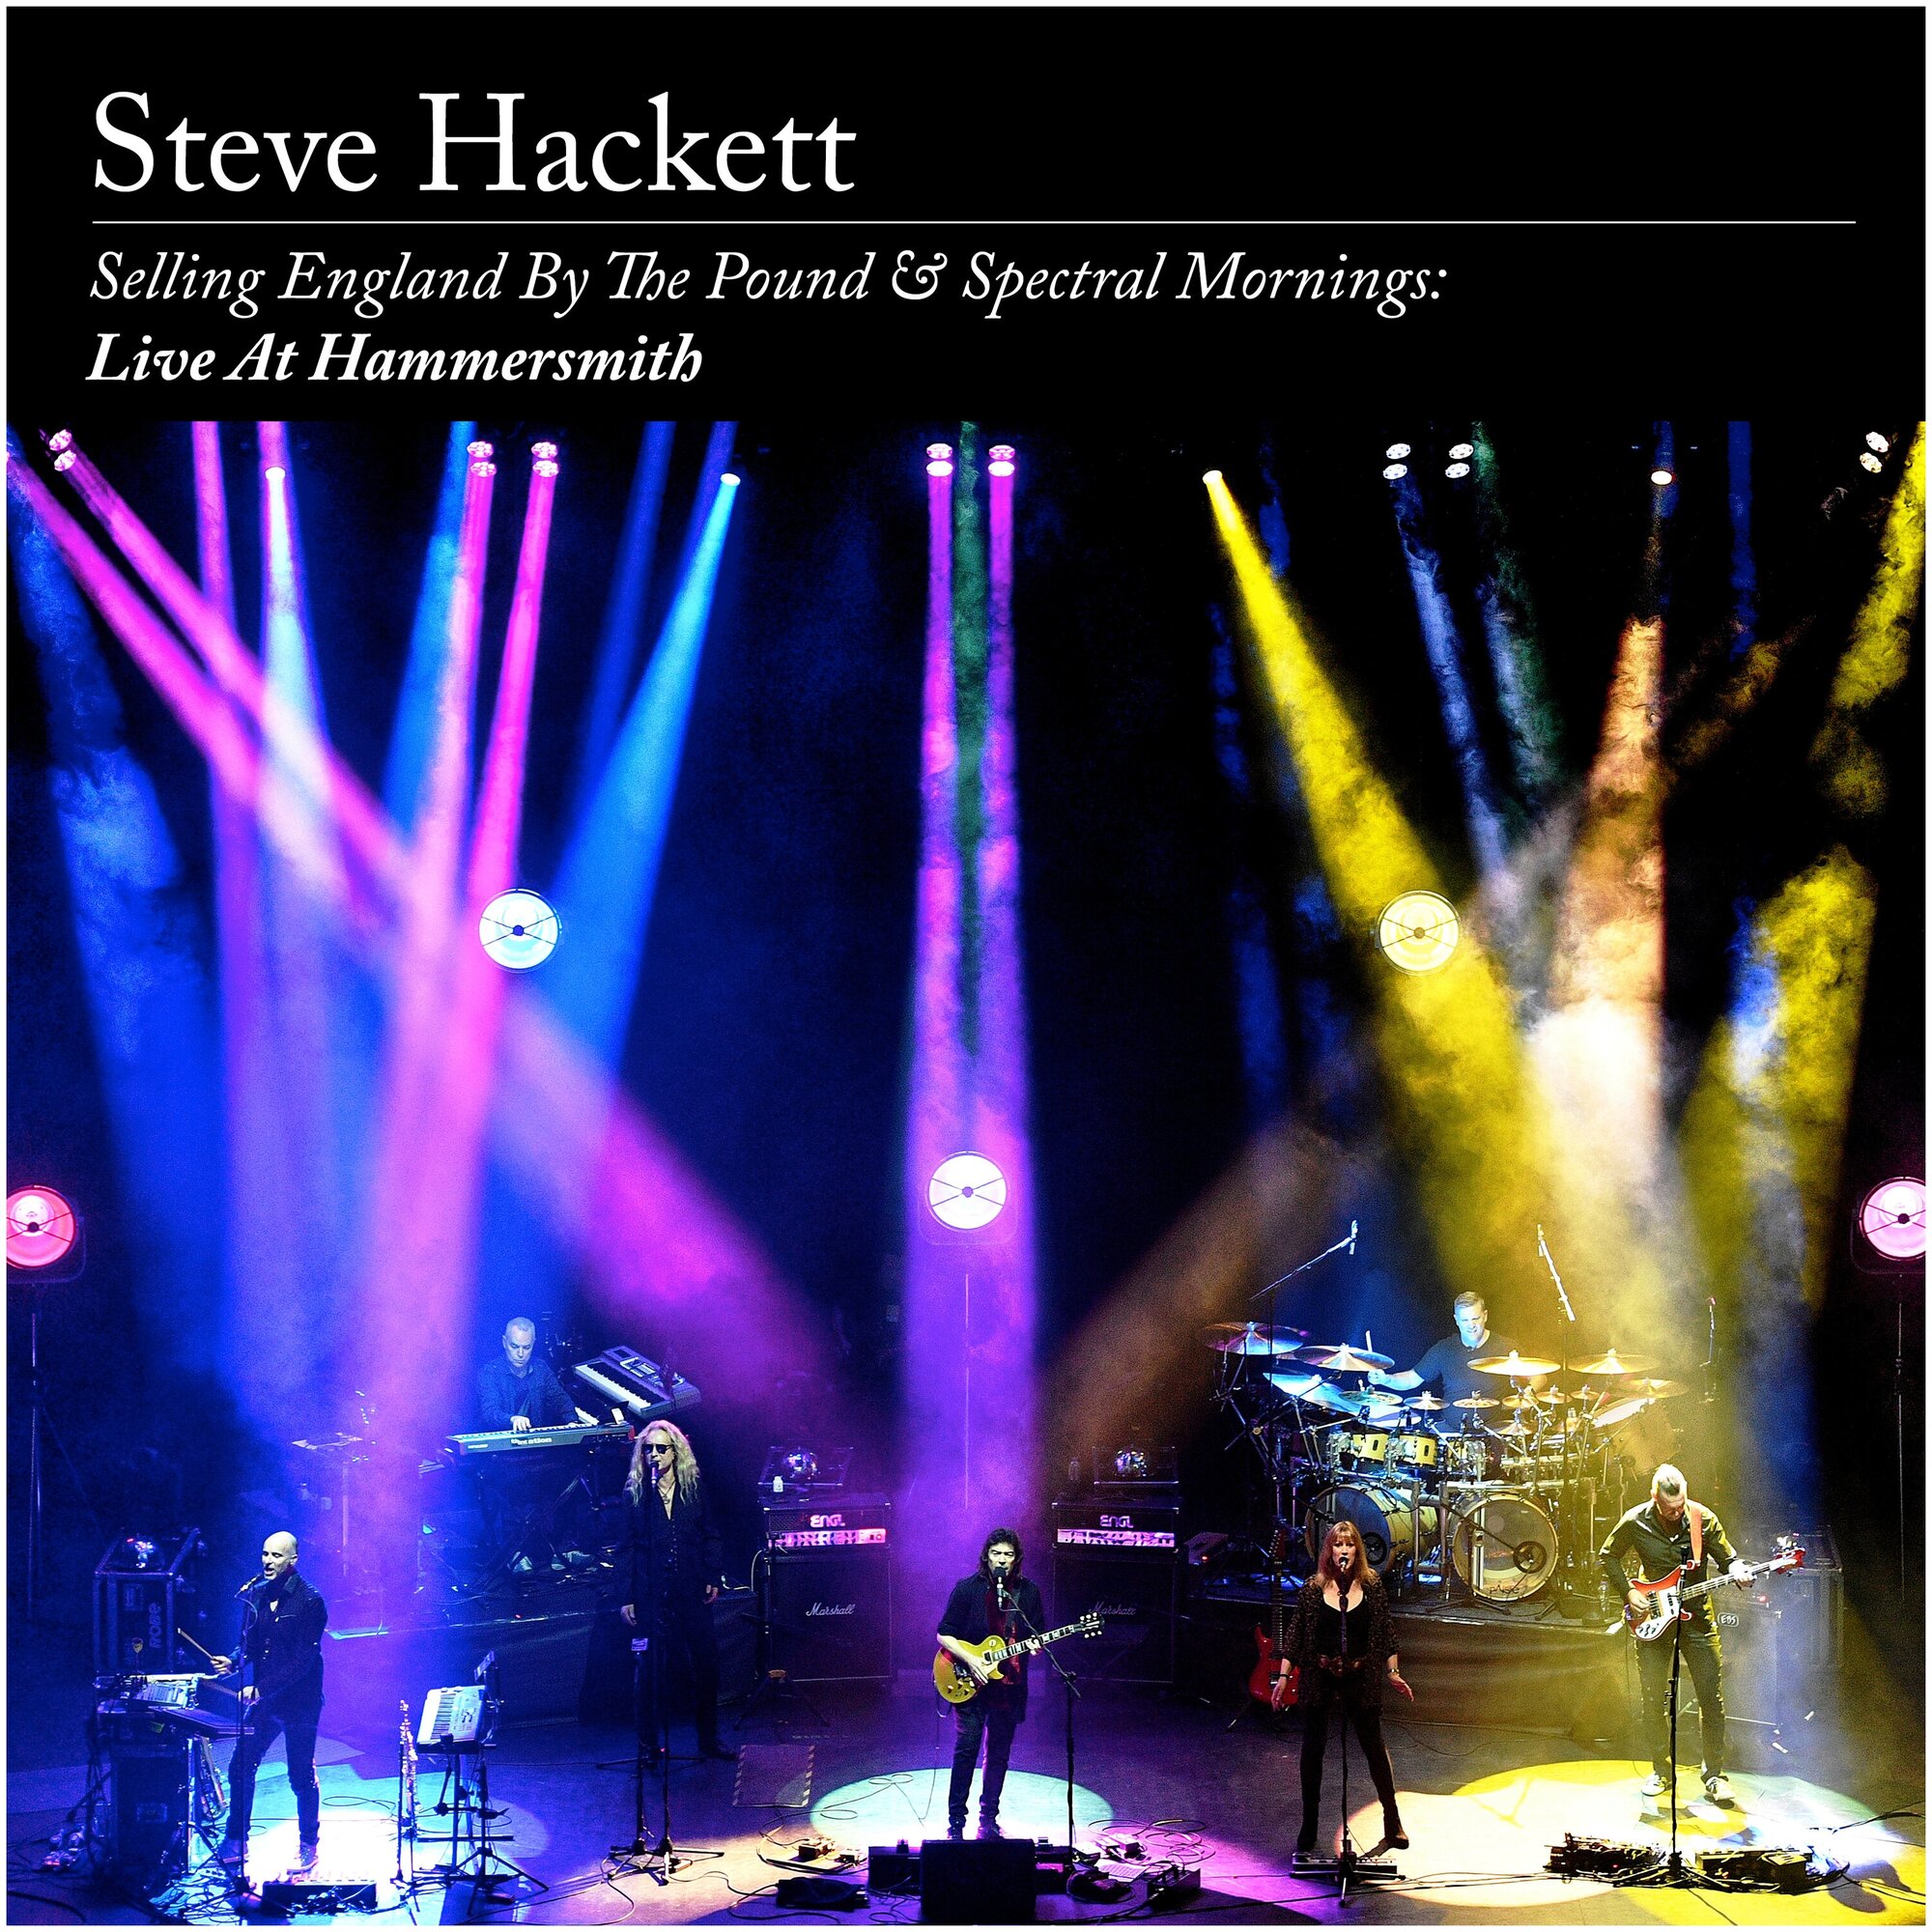 Steve Hackett – Selling England By The Pound & Spectral Mornings: Live At Hammersmith (4 LP+2 CD)